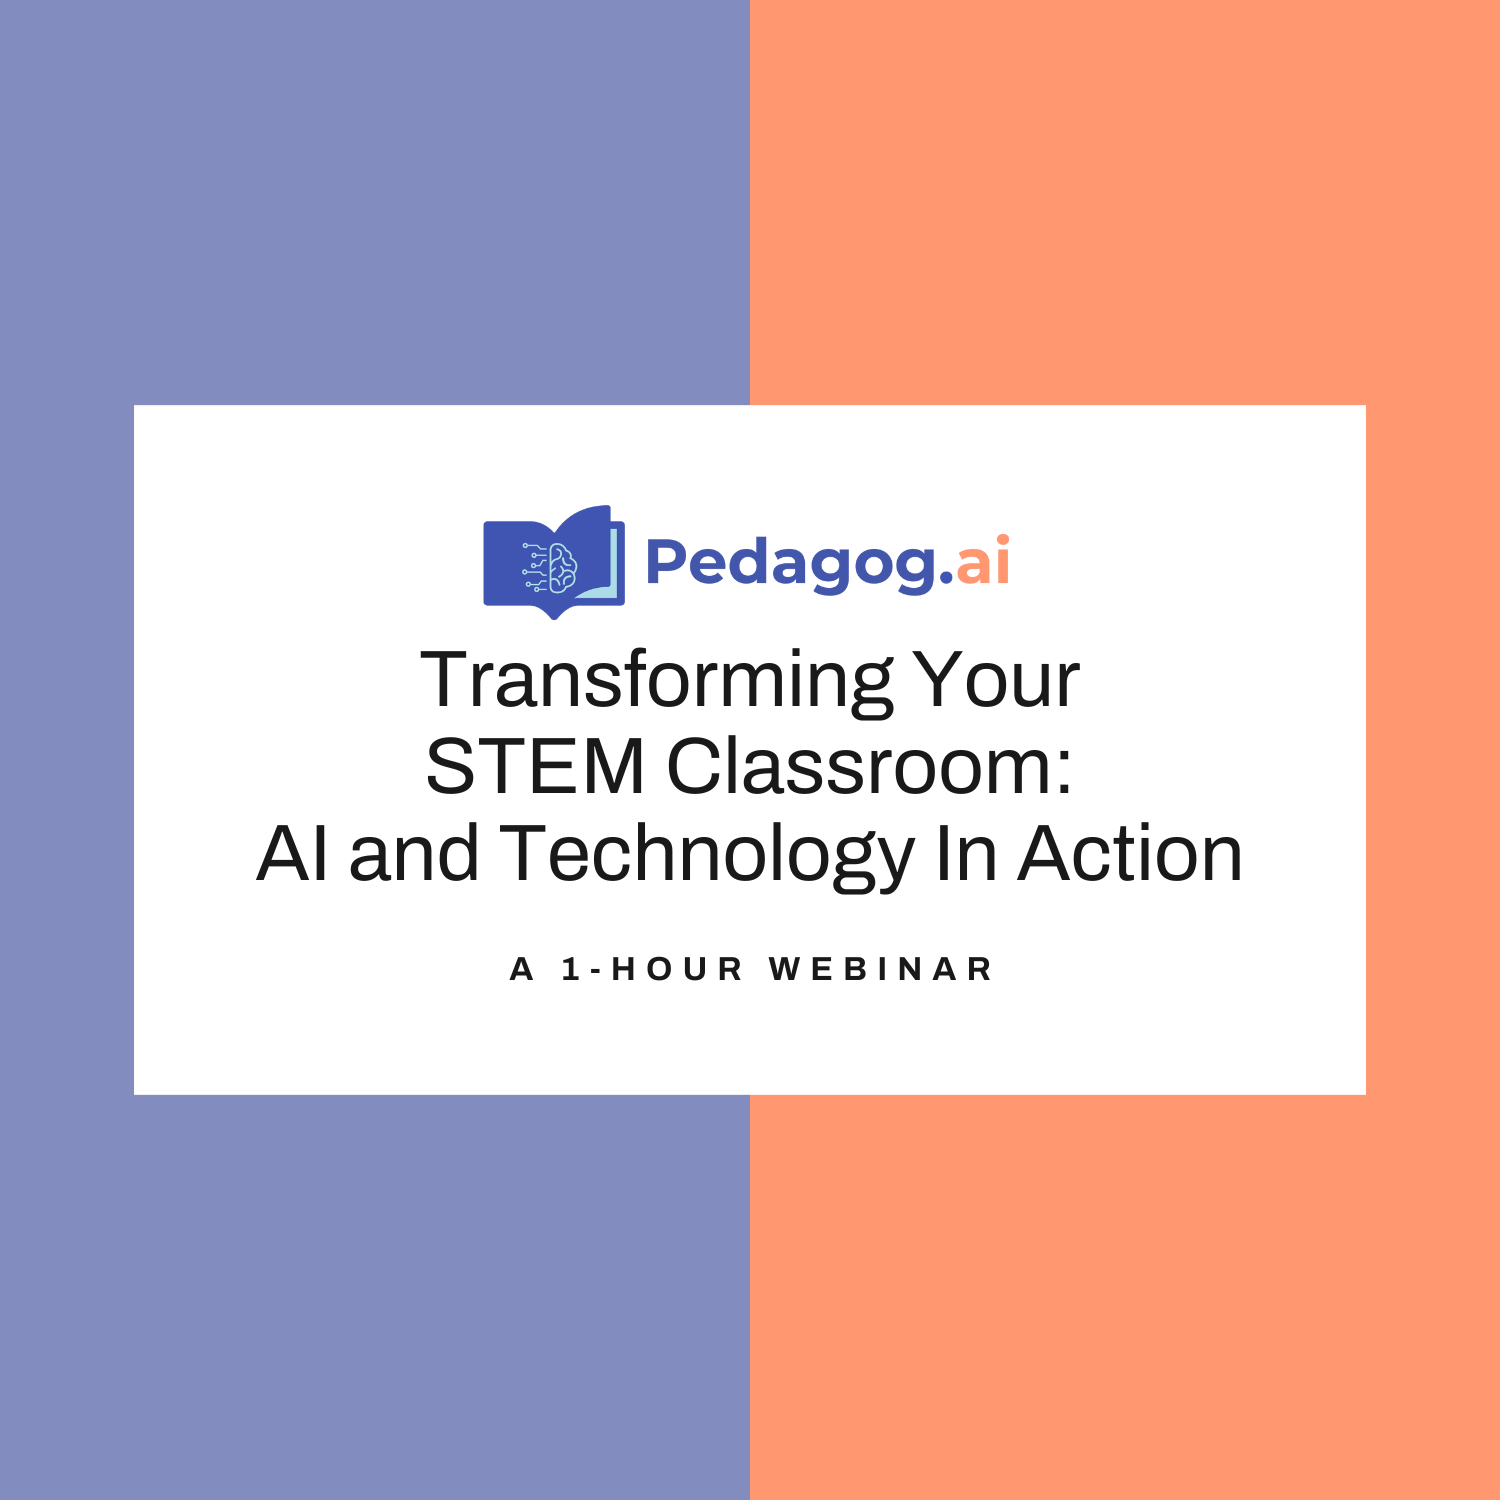 Transforming Your STEM Classroom: AI and Technology In Action